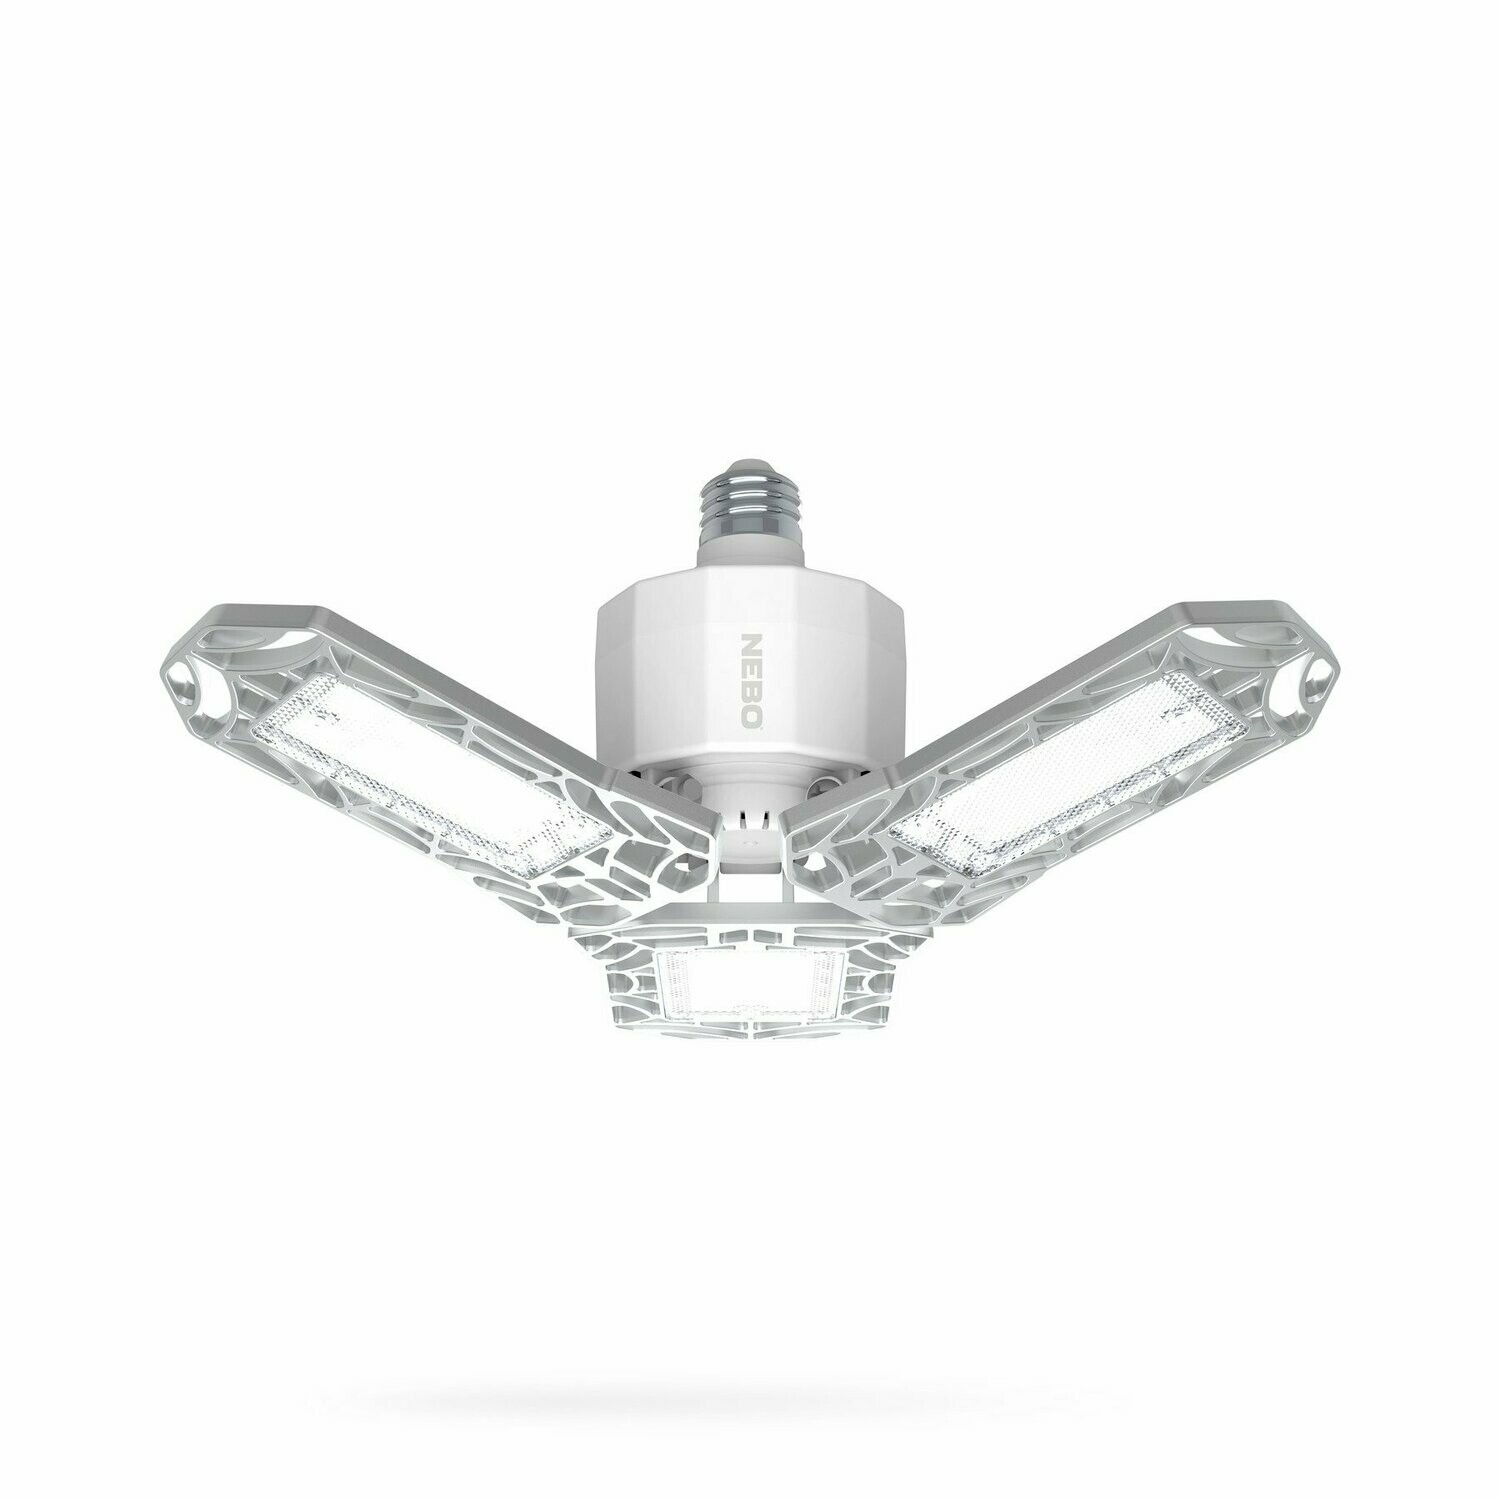 60 watt bulb replacement with 3 flexable arms at 6000 lumens